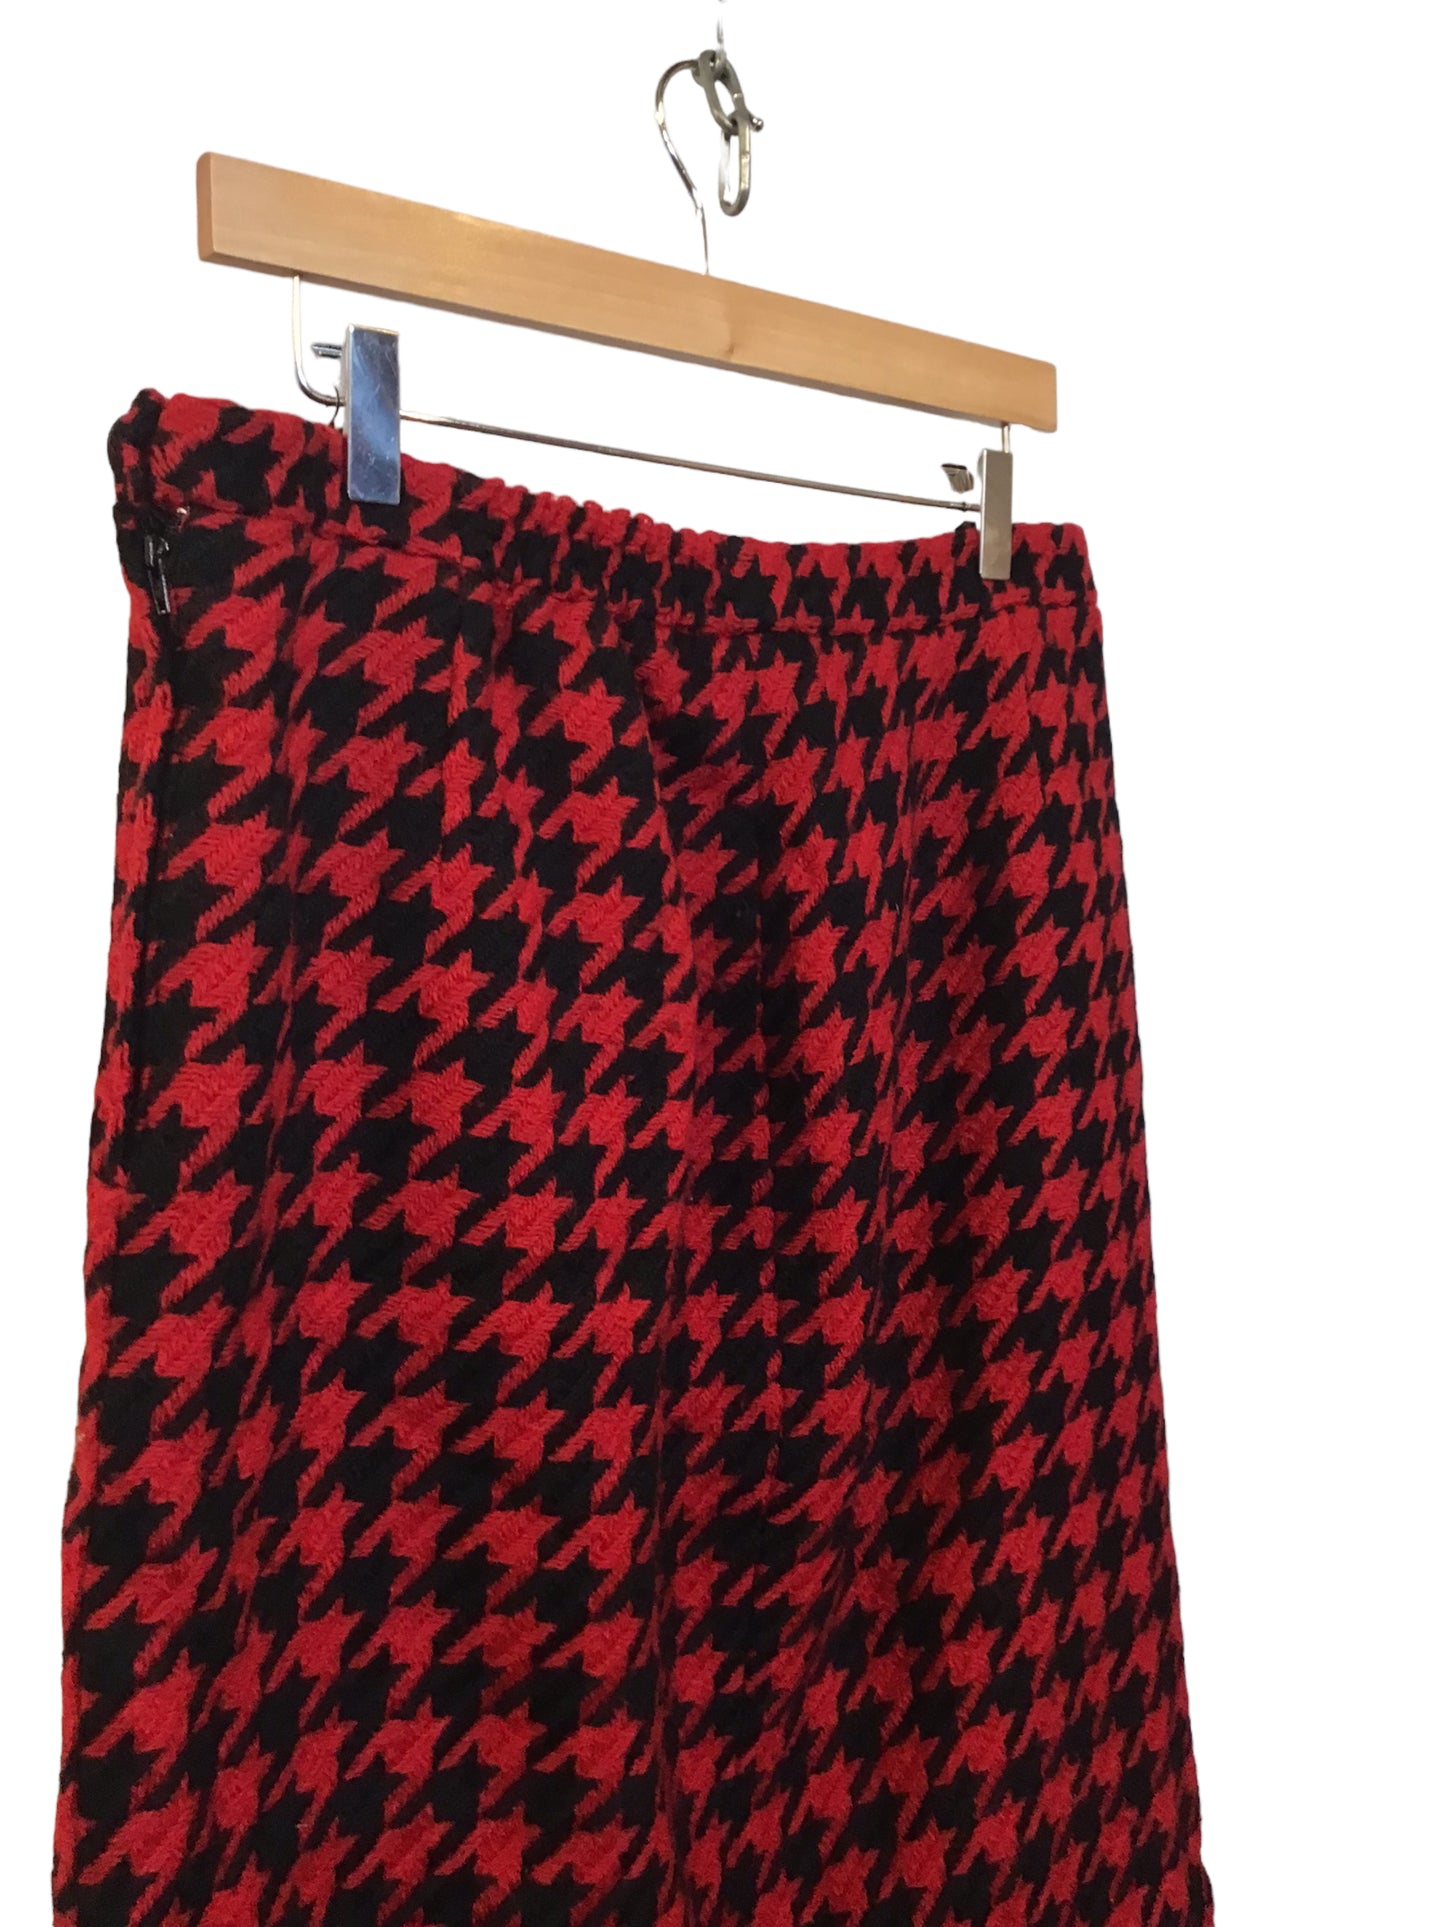 Weill Red and Black Skirt (Size XL)